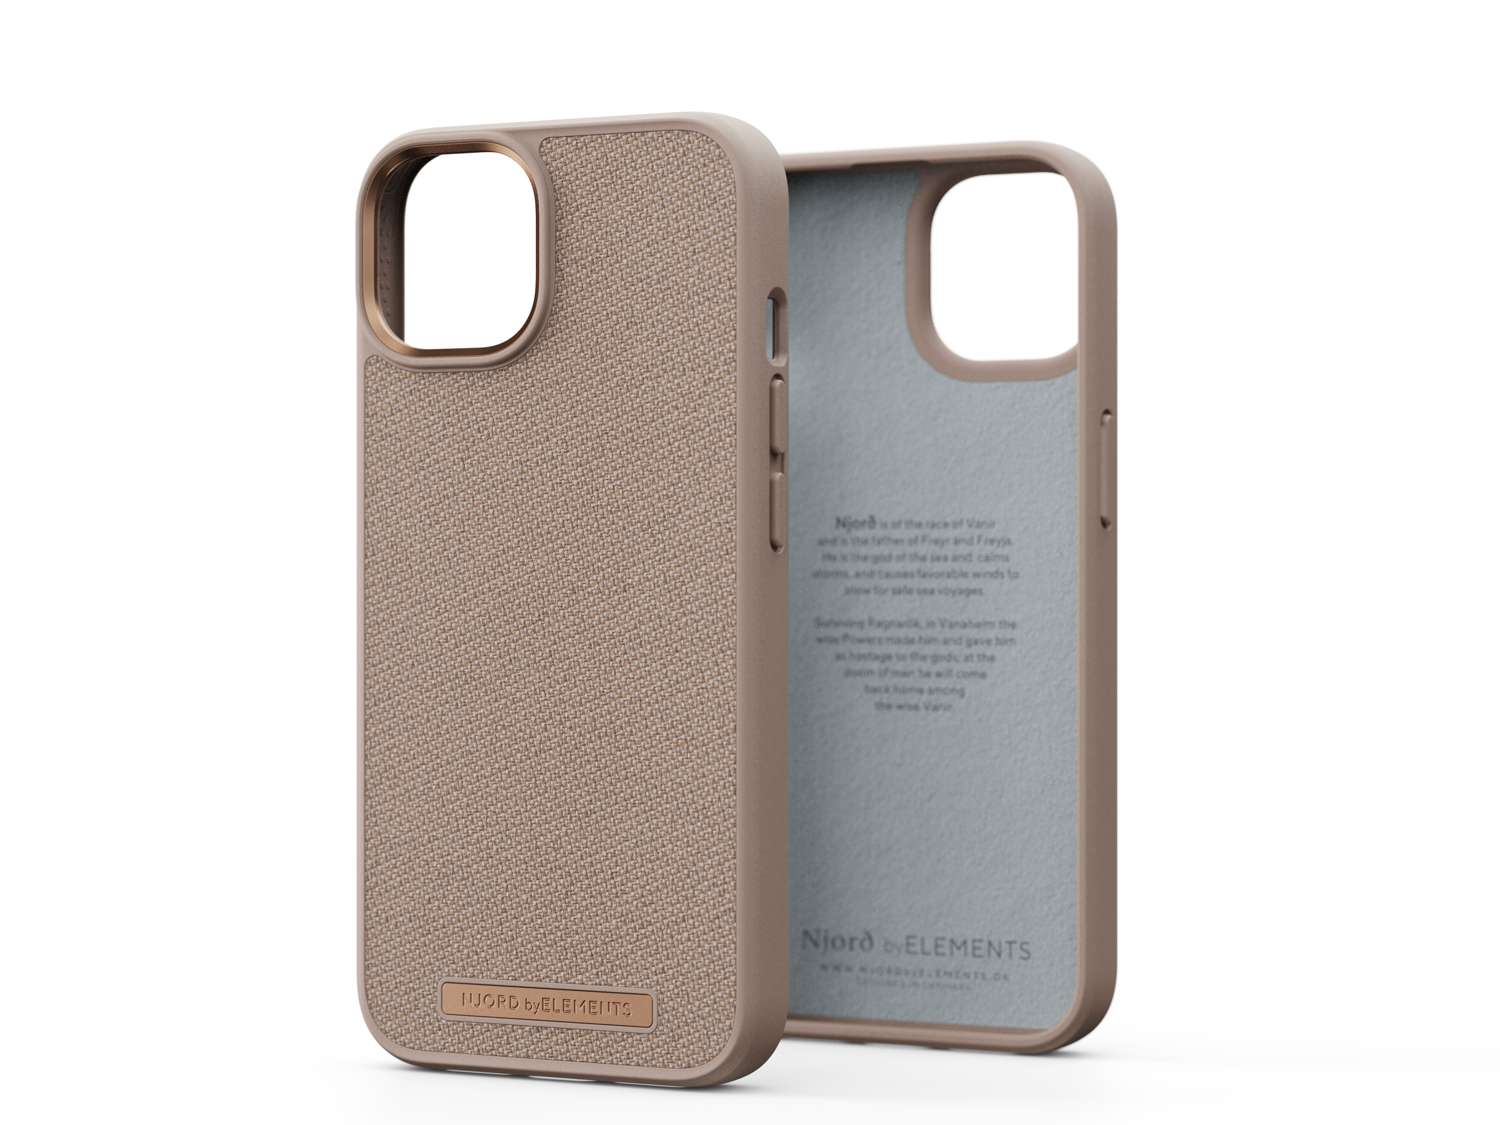 Fabric Just Case - Pink Sand